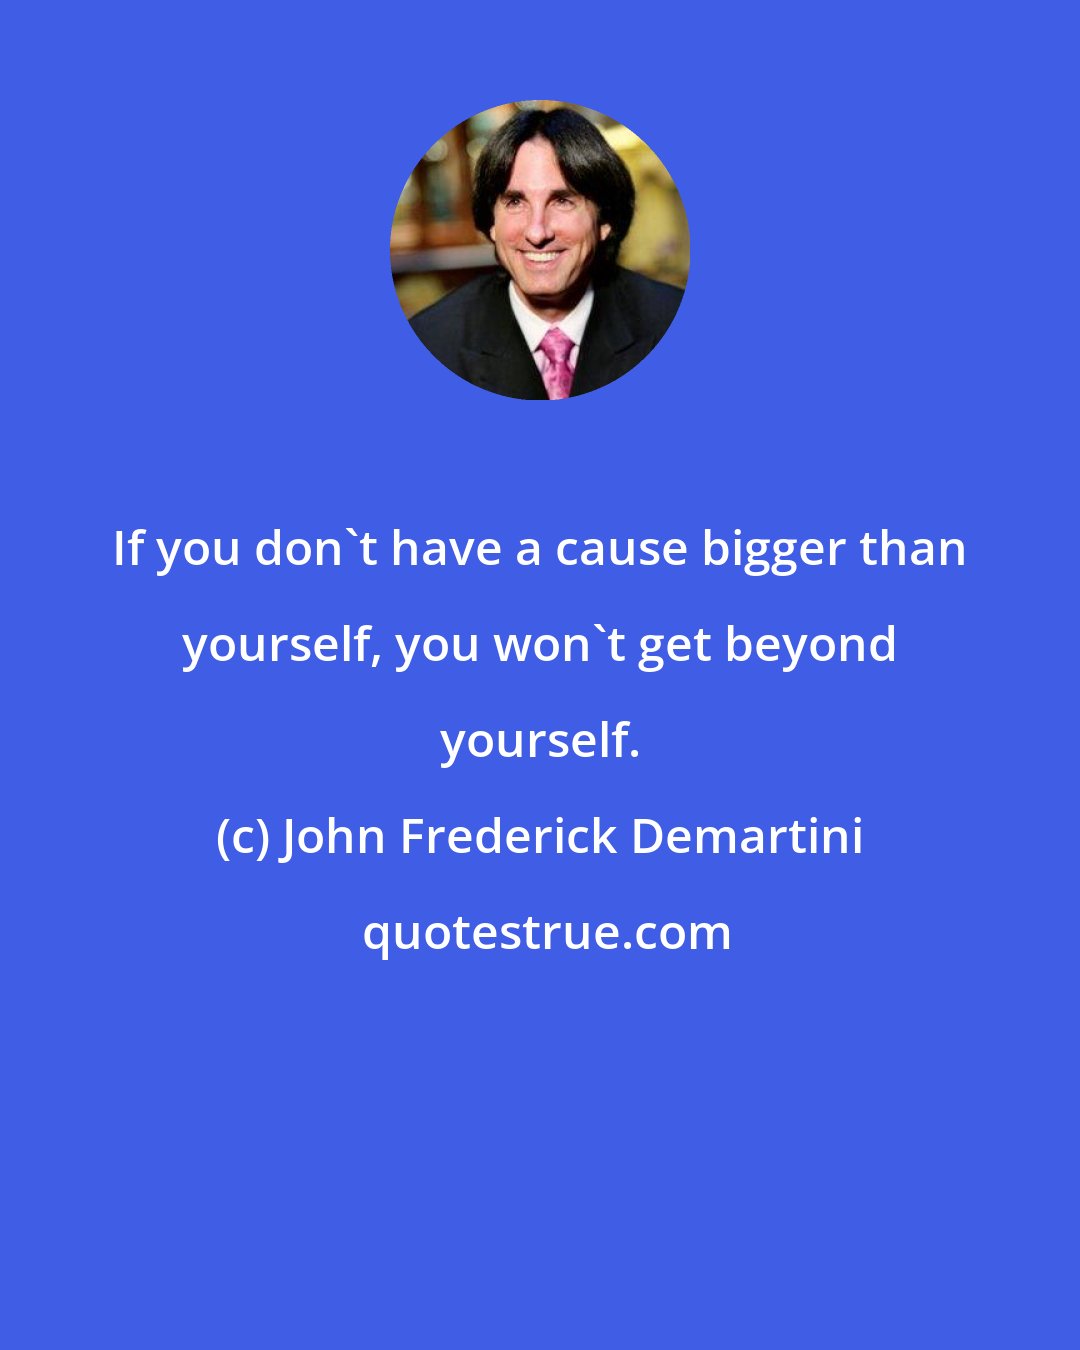 John Frederick Demartini: If you don't have a cause bigger than yourself, you won't get beyond yourself.